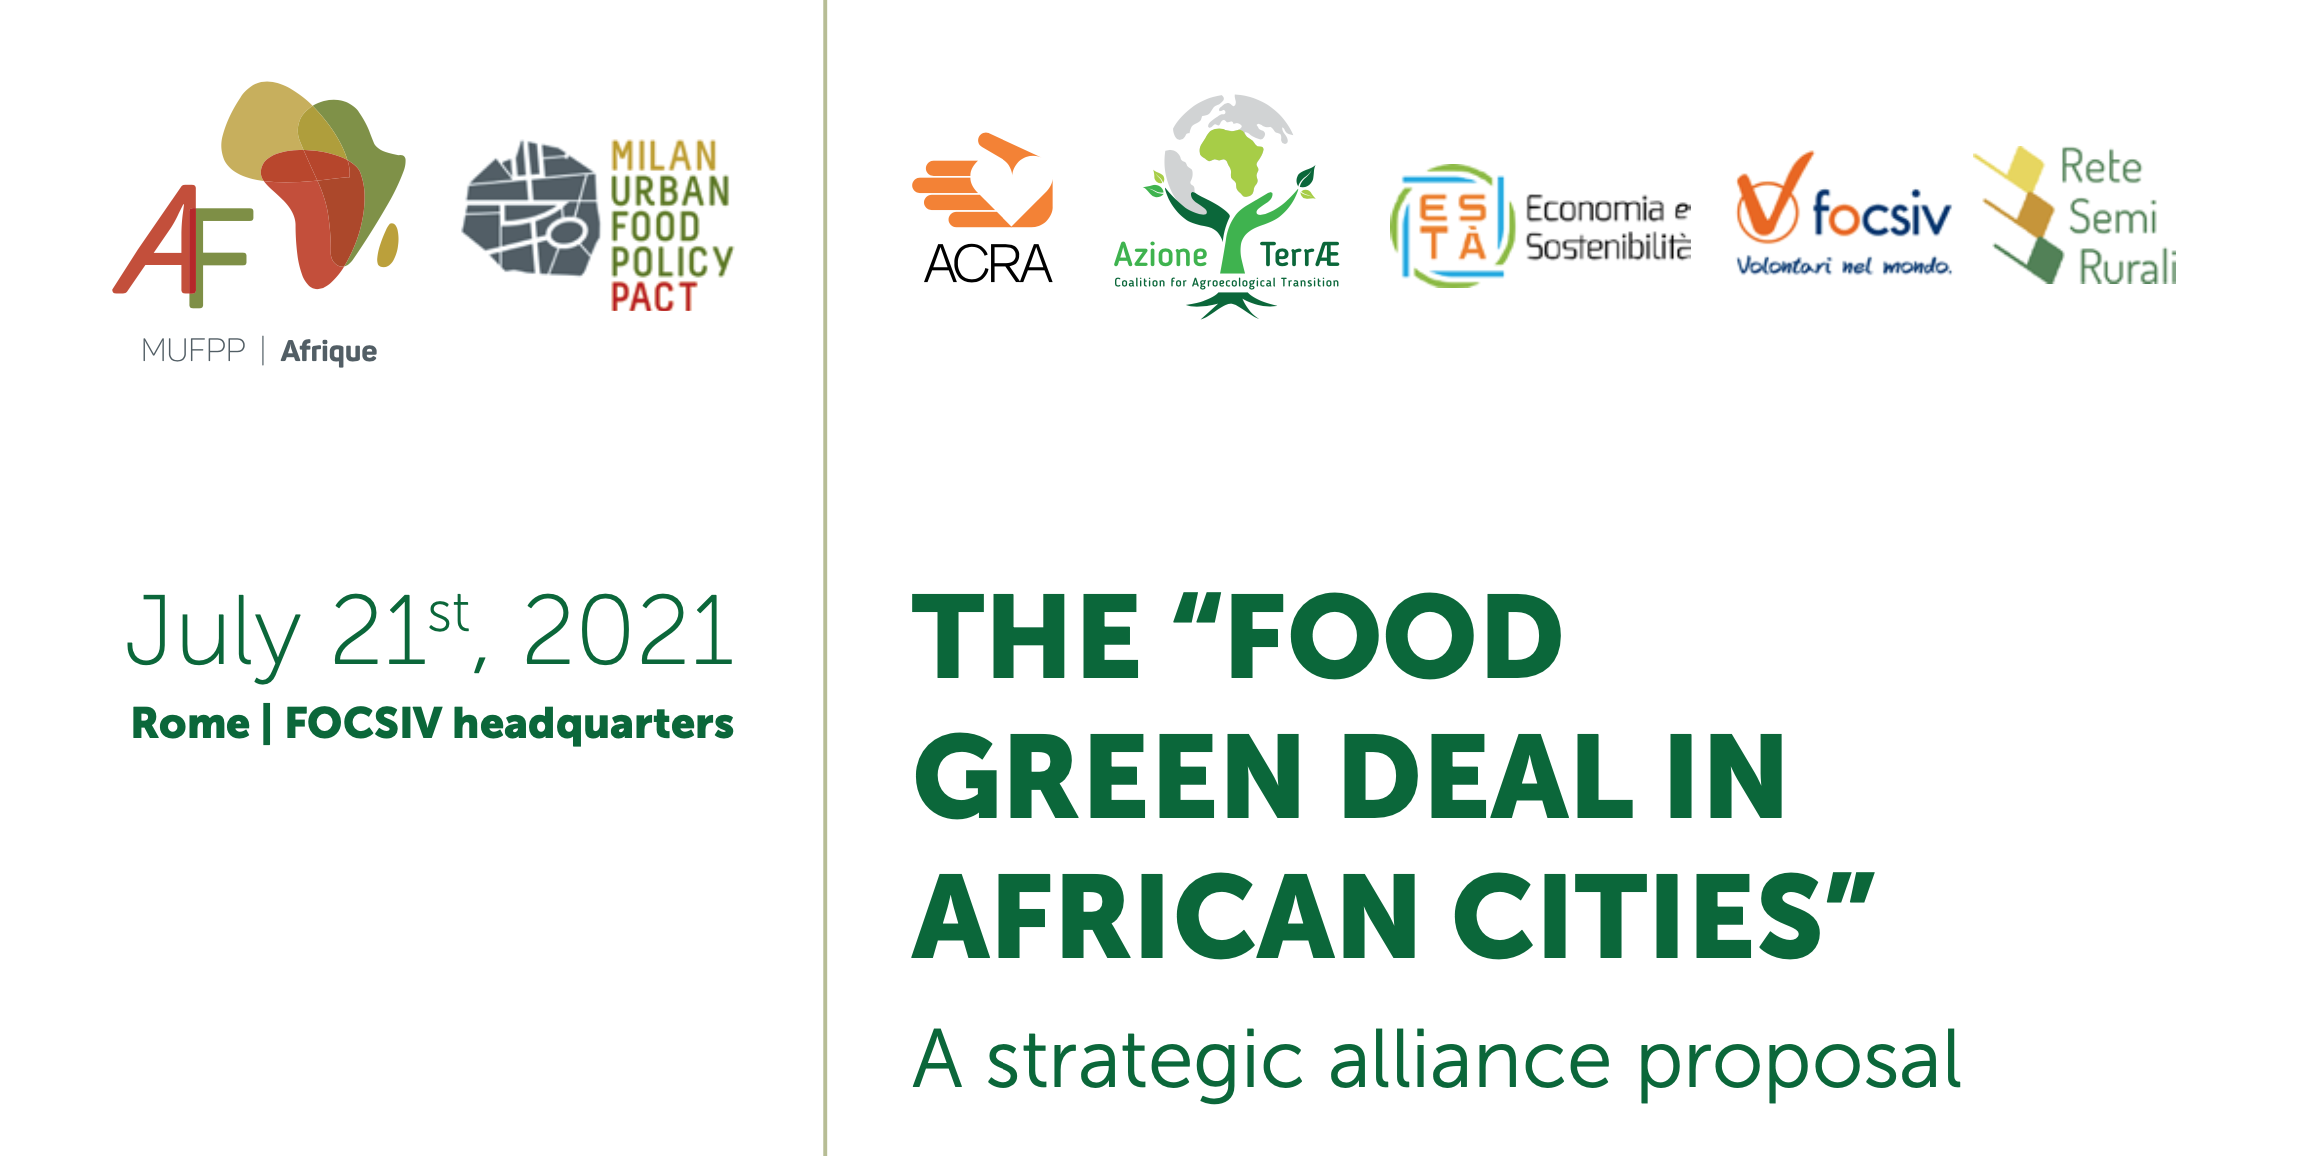 RUAF presents the Milan Urban Food Policy Pact Monitoring Framework Handbook and Resource Pack at “The Food Green Deal in African cities” event